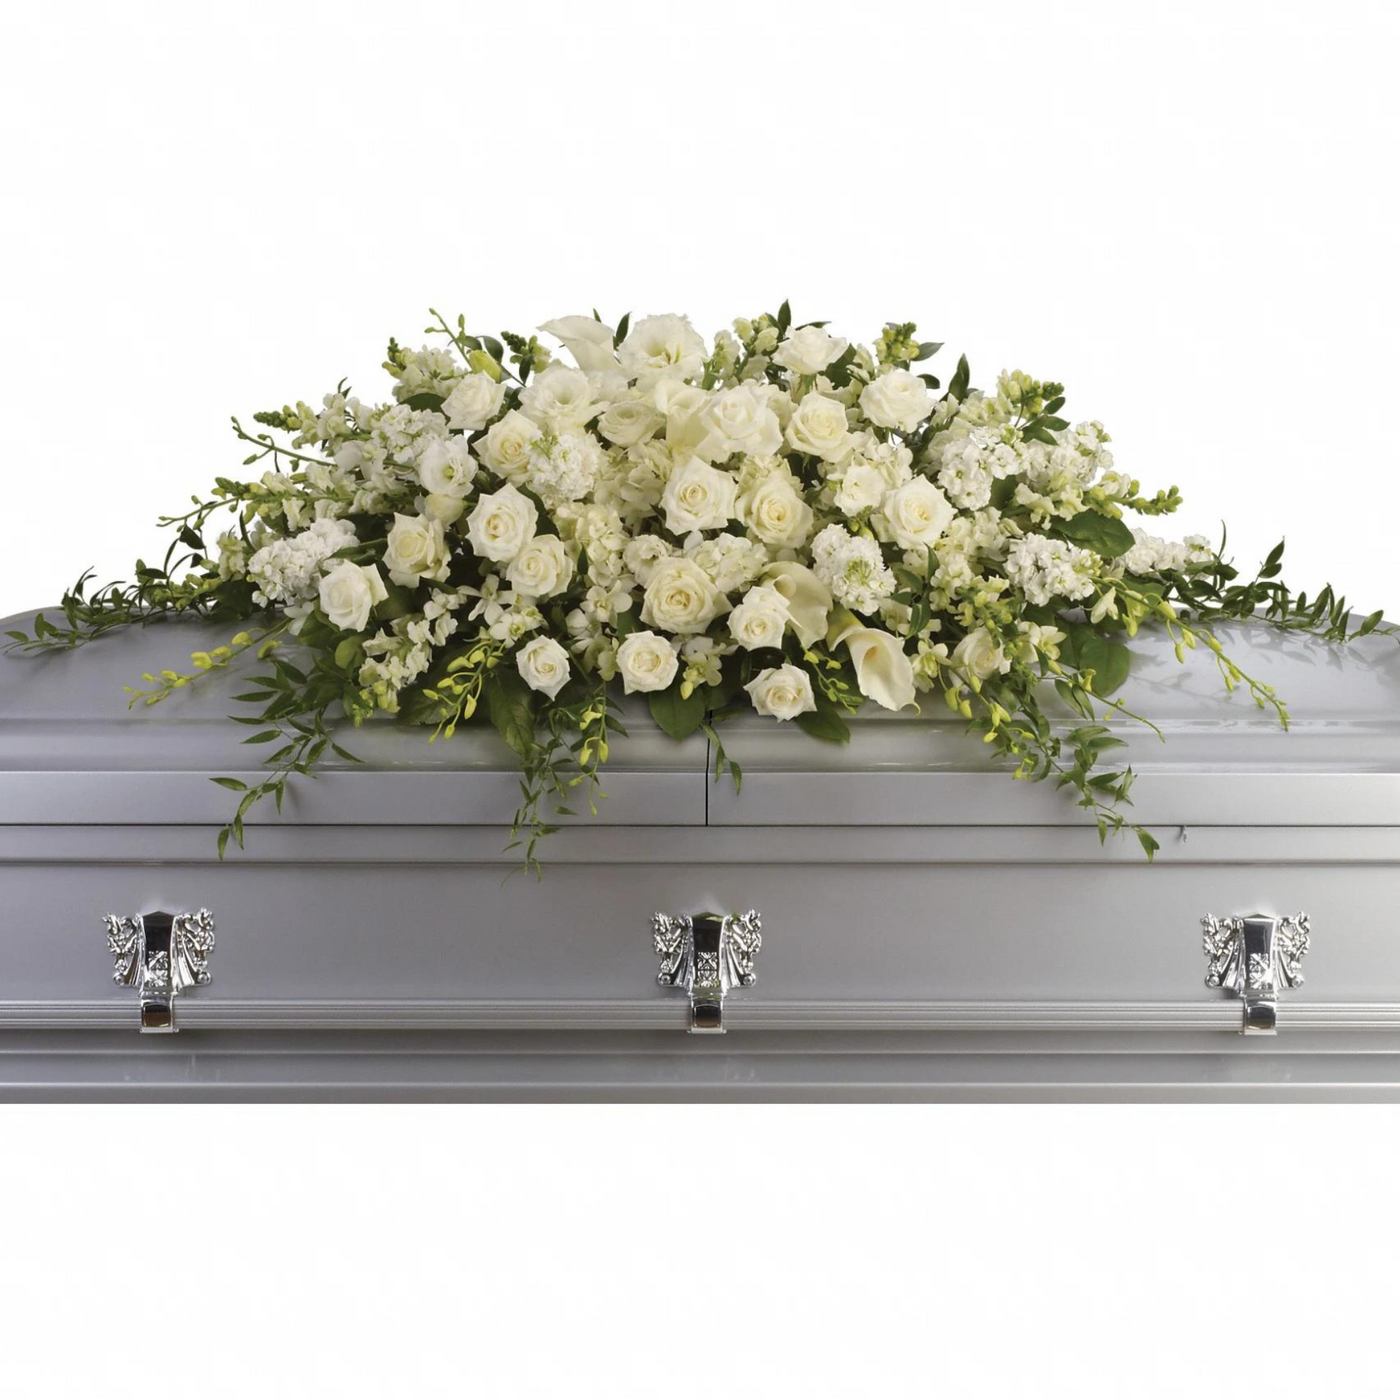 Peaceful White Casket Funeral Flowers